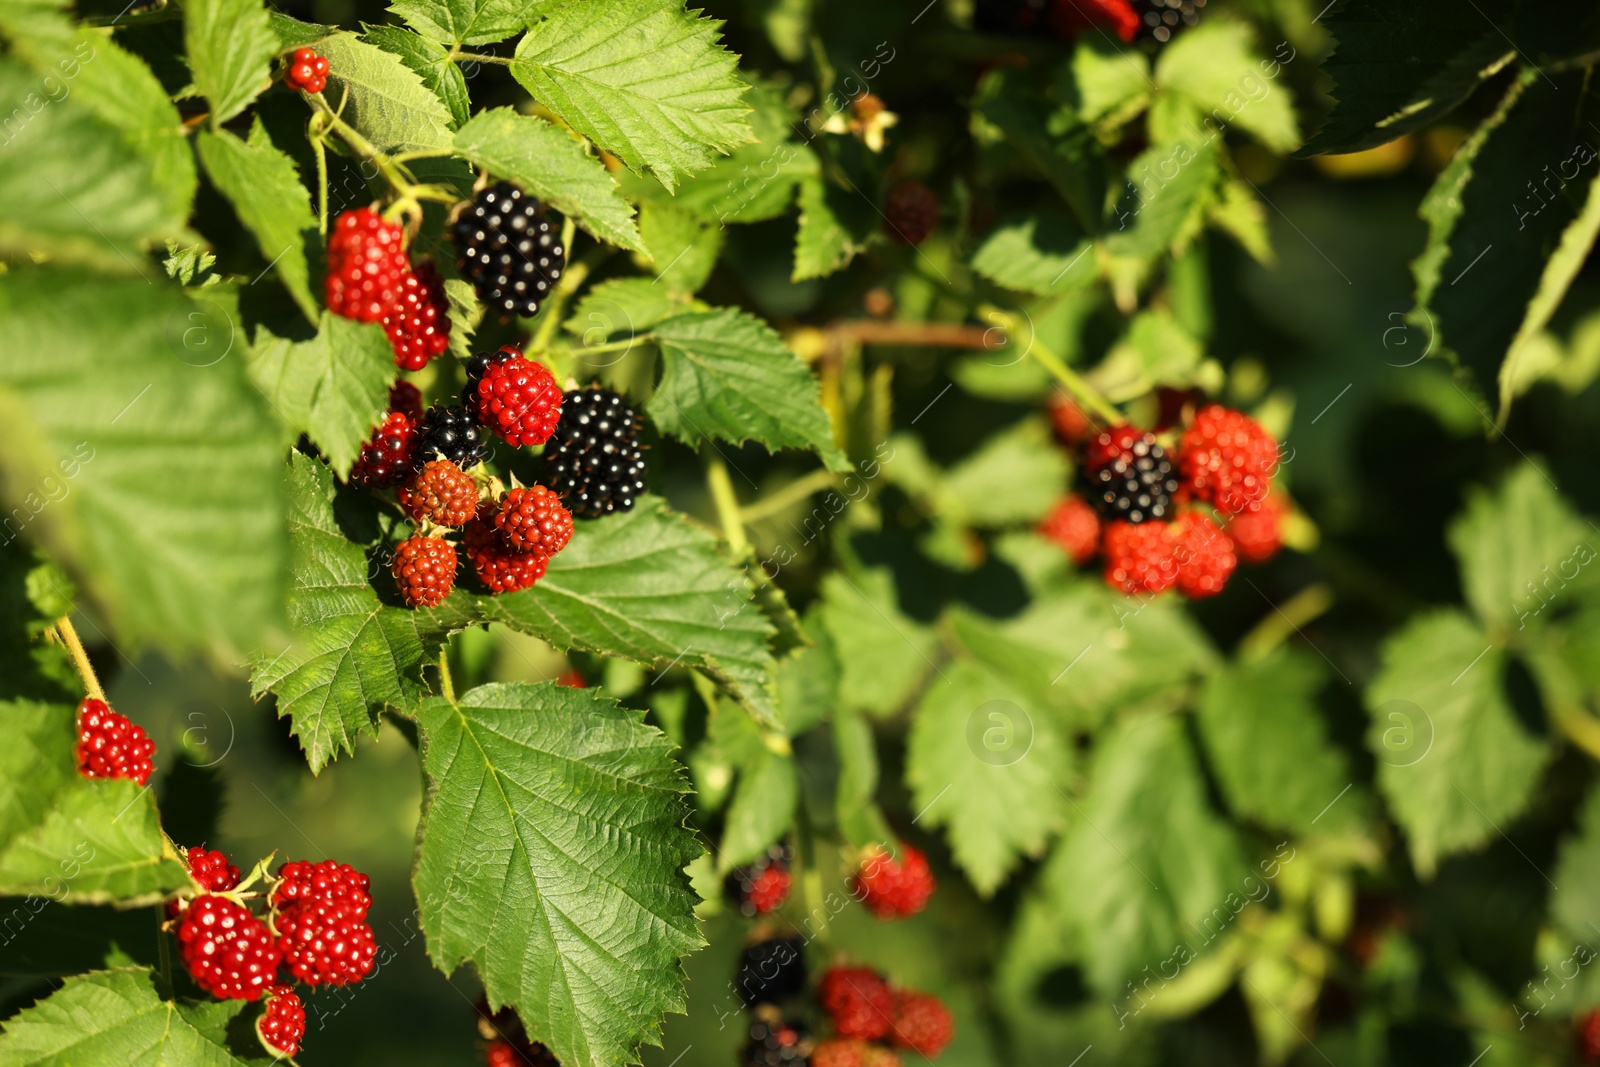 Photo of Ripe and unripe blackberries growing on bush outdoors, closeup